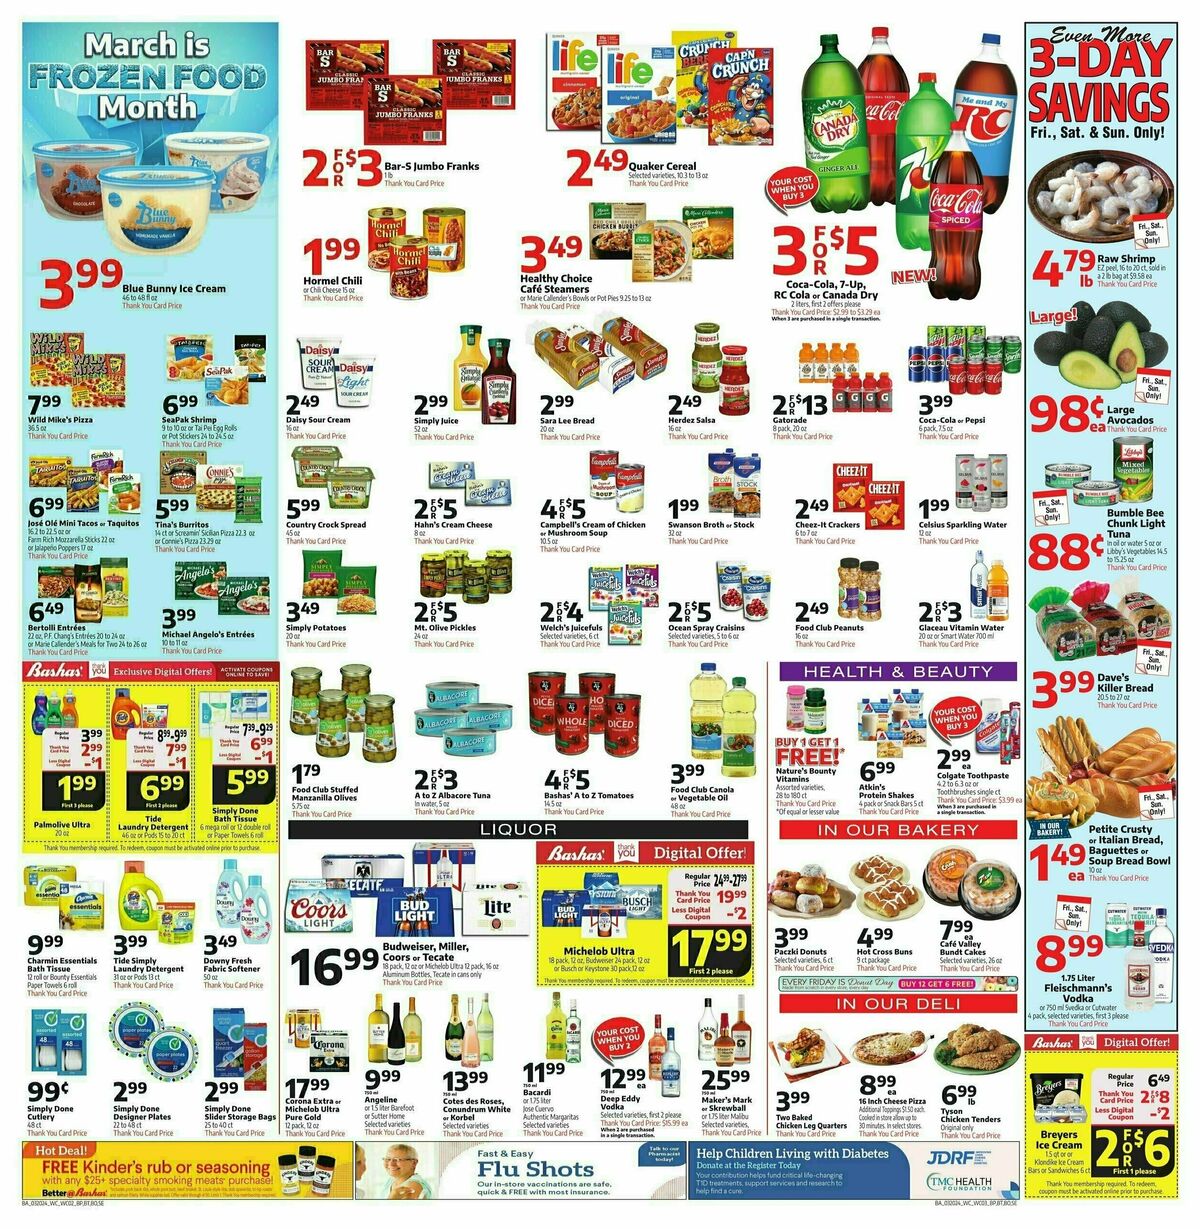 Bashas Weekly Ad from March 20